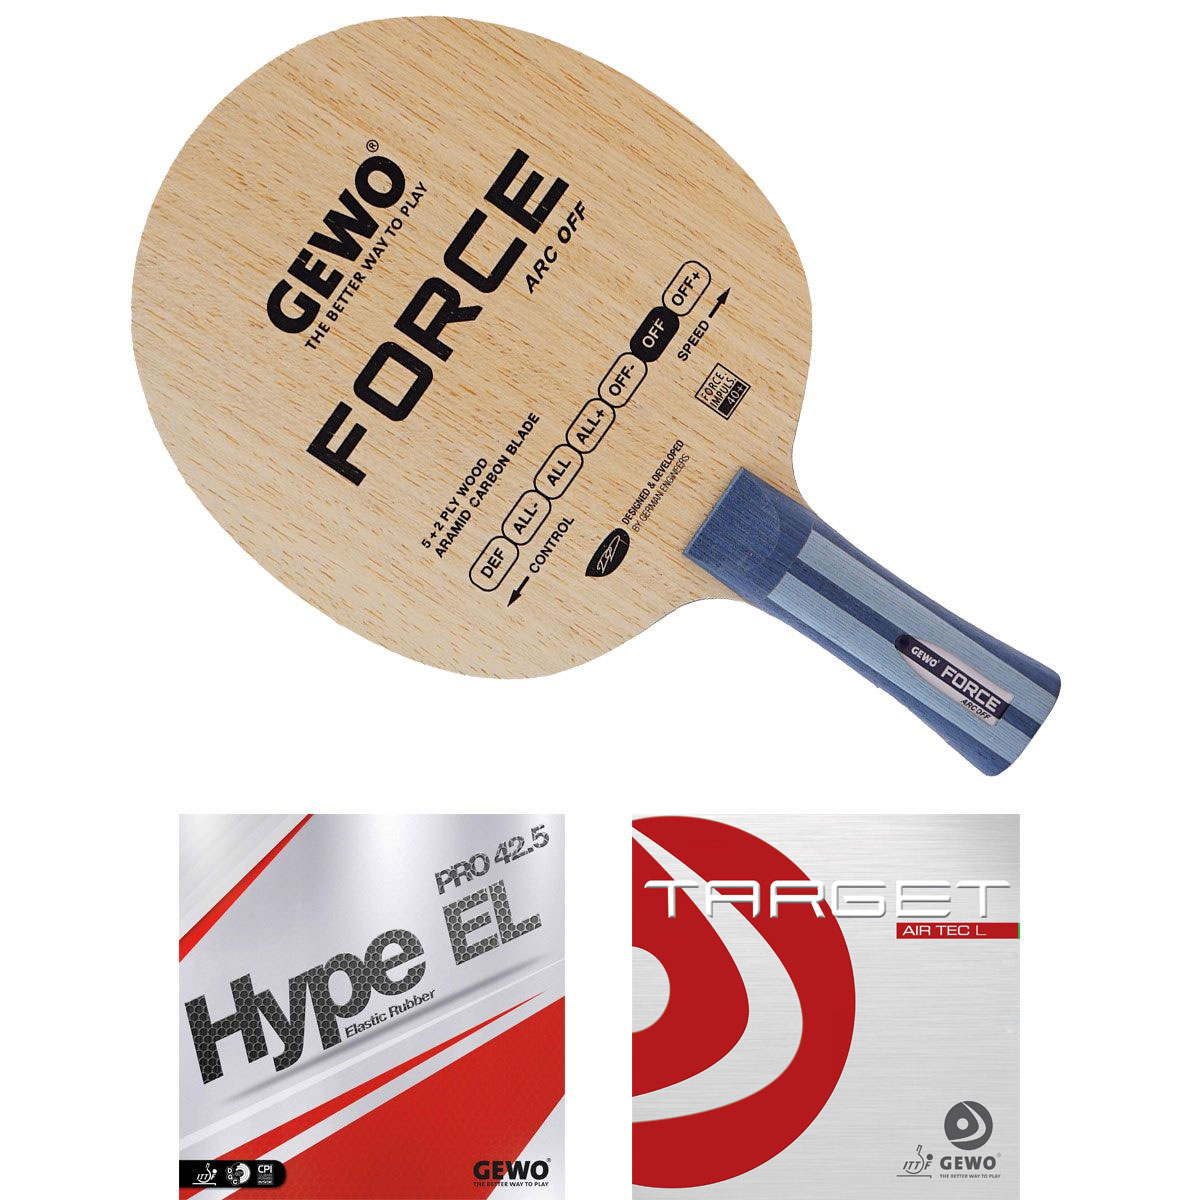 GEWO Bat: Blade Force ARC  with Hype EL Pro 42.5 + Target airTEC L  flared